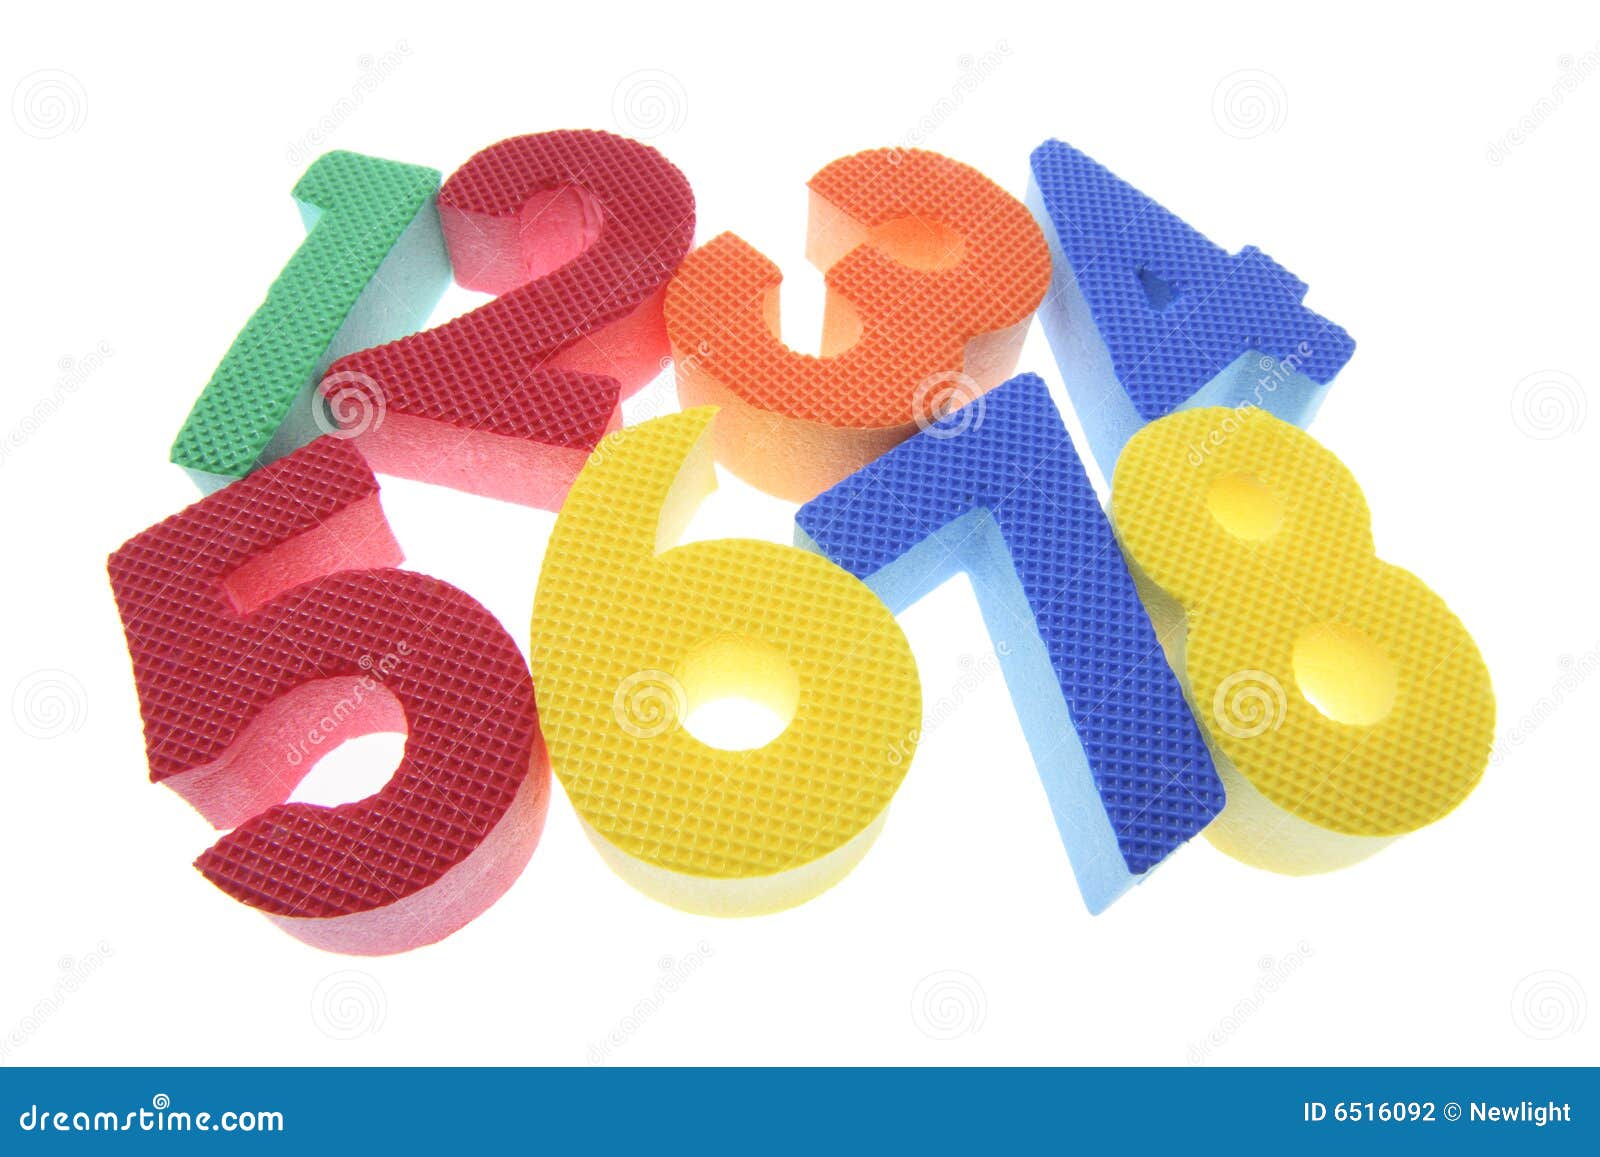 Foam Numbers stock photo. Image of pile, play, arithmetic - 9246710